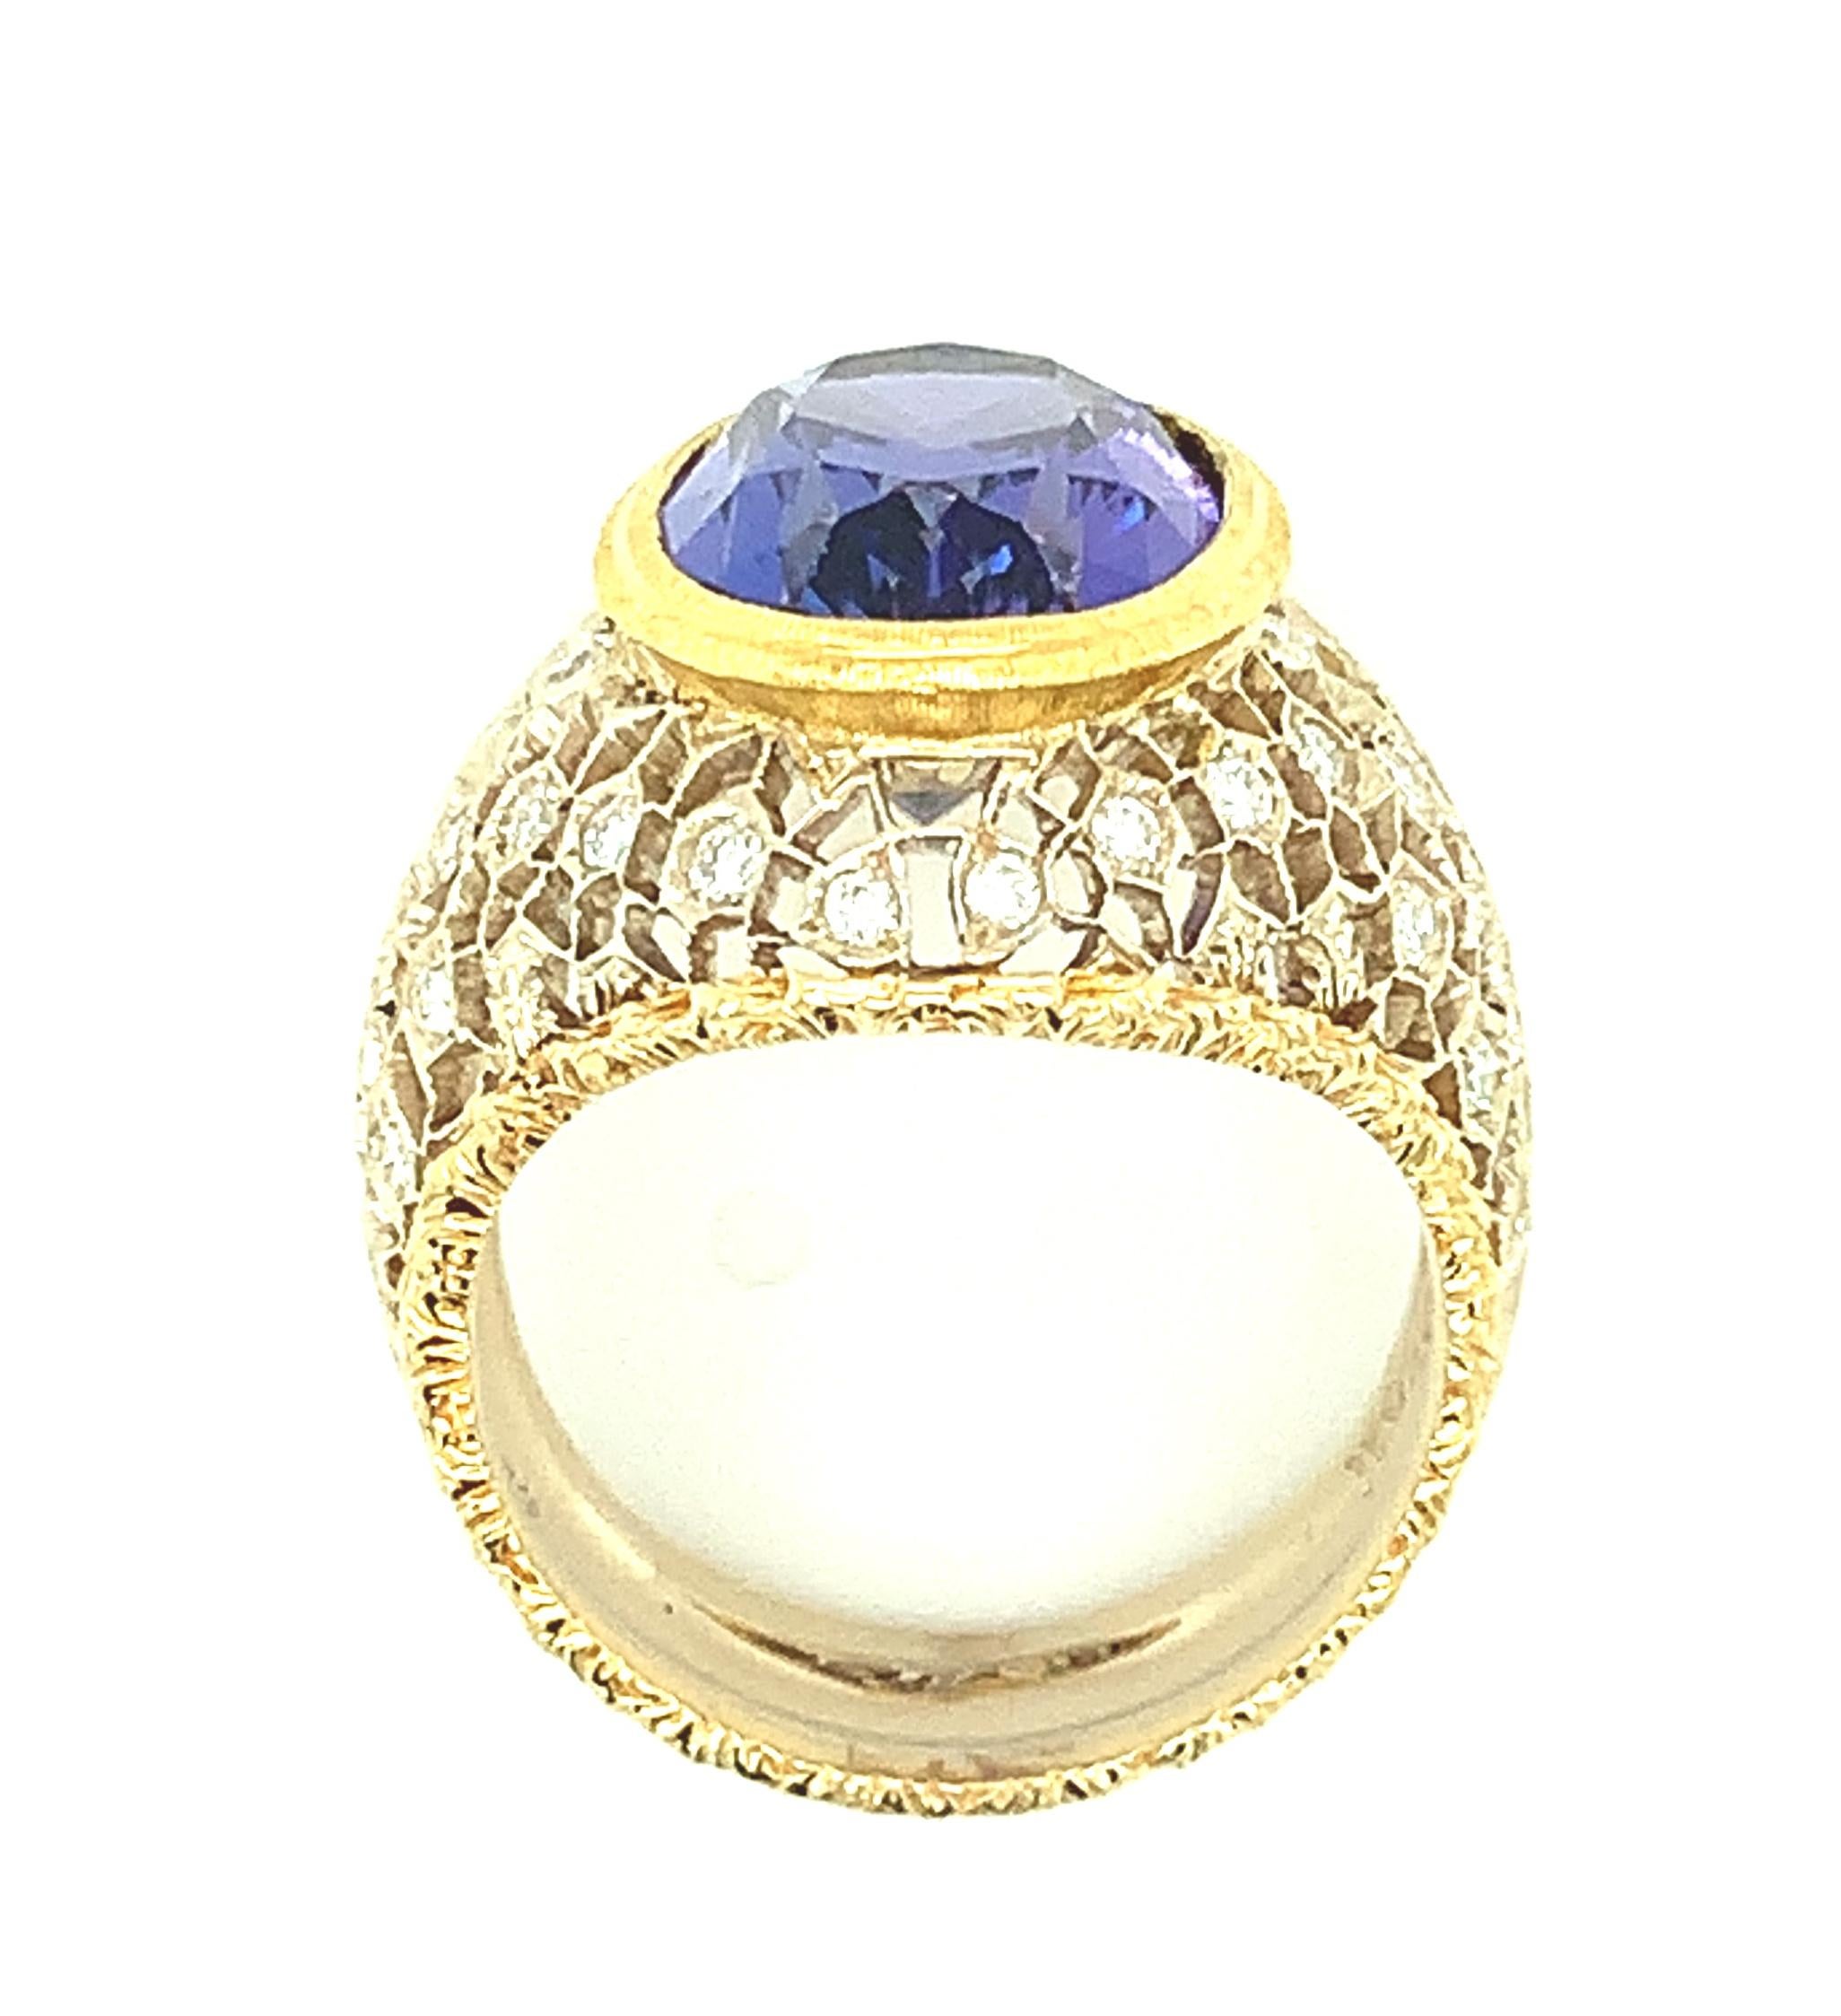 8.25 Carat Tanzanite and Diamond Florentine Cocktail Ring in 18k Gold For Sale 2